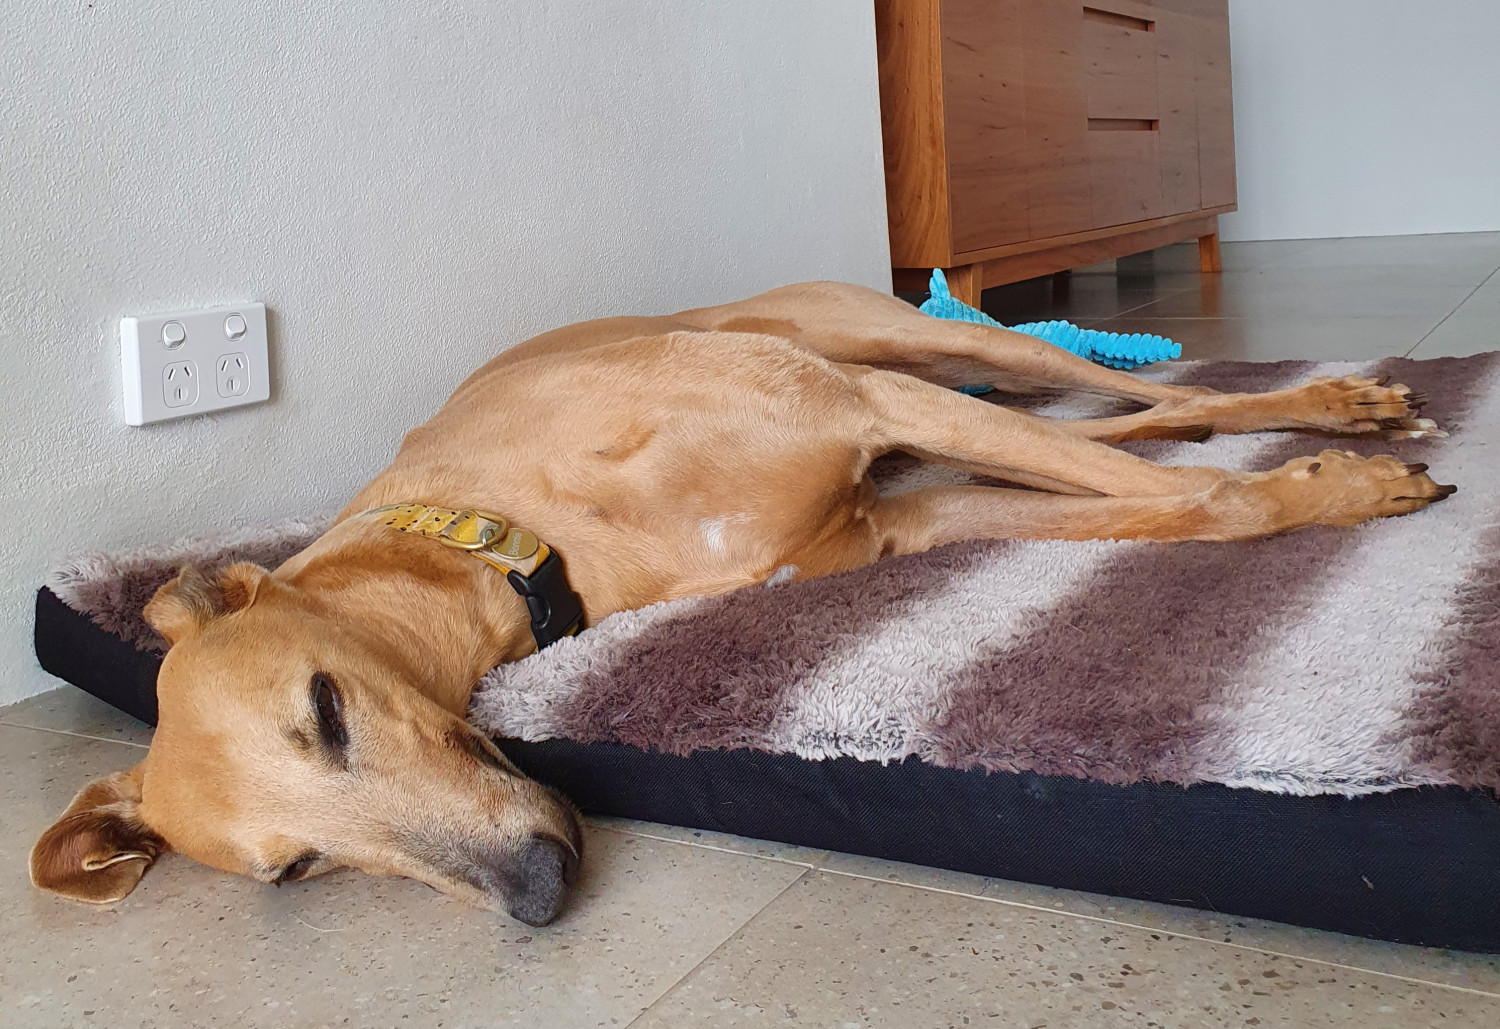 Focus Care's pet therapy Greyhound sleeping in her bed